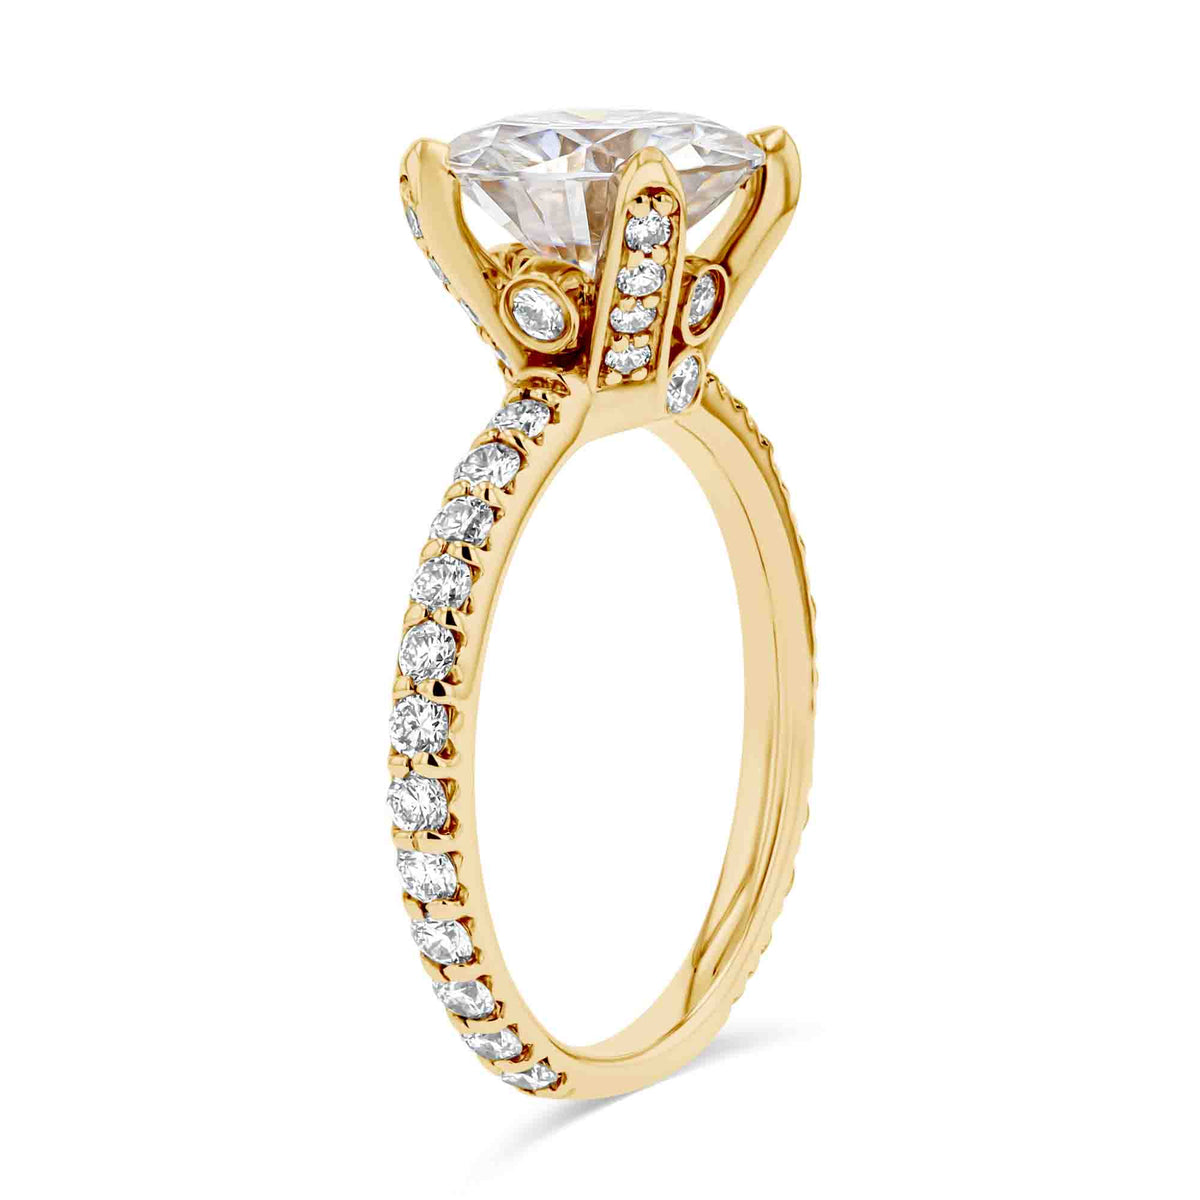 Queen Vintage Engagement Ring set with a 8.5mm Round Cut Forever One Colorless Moissanite in 14K Yellow Gold